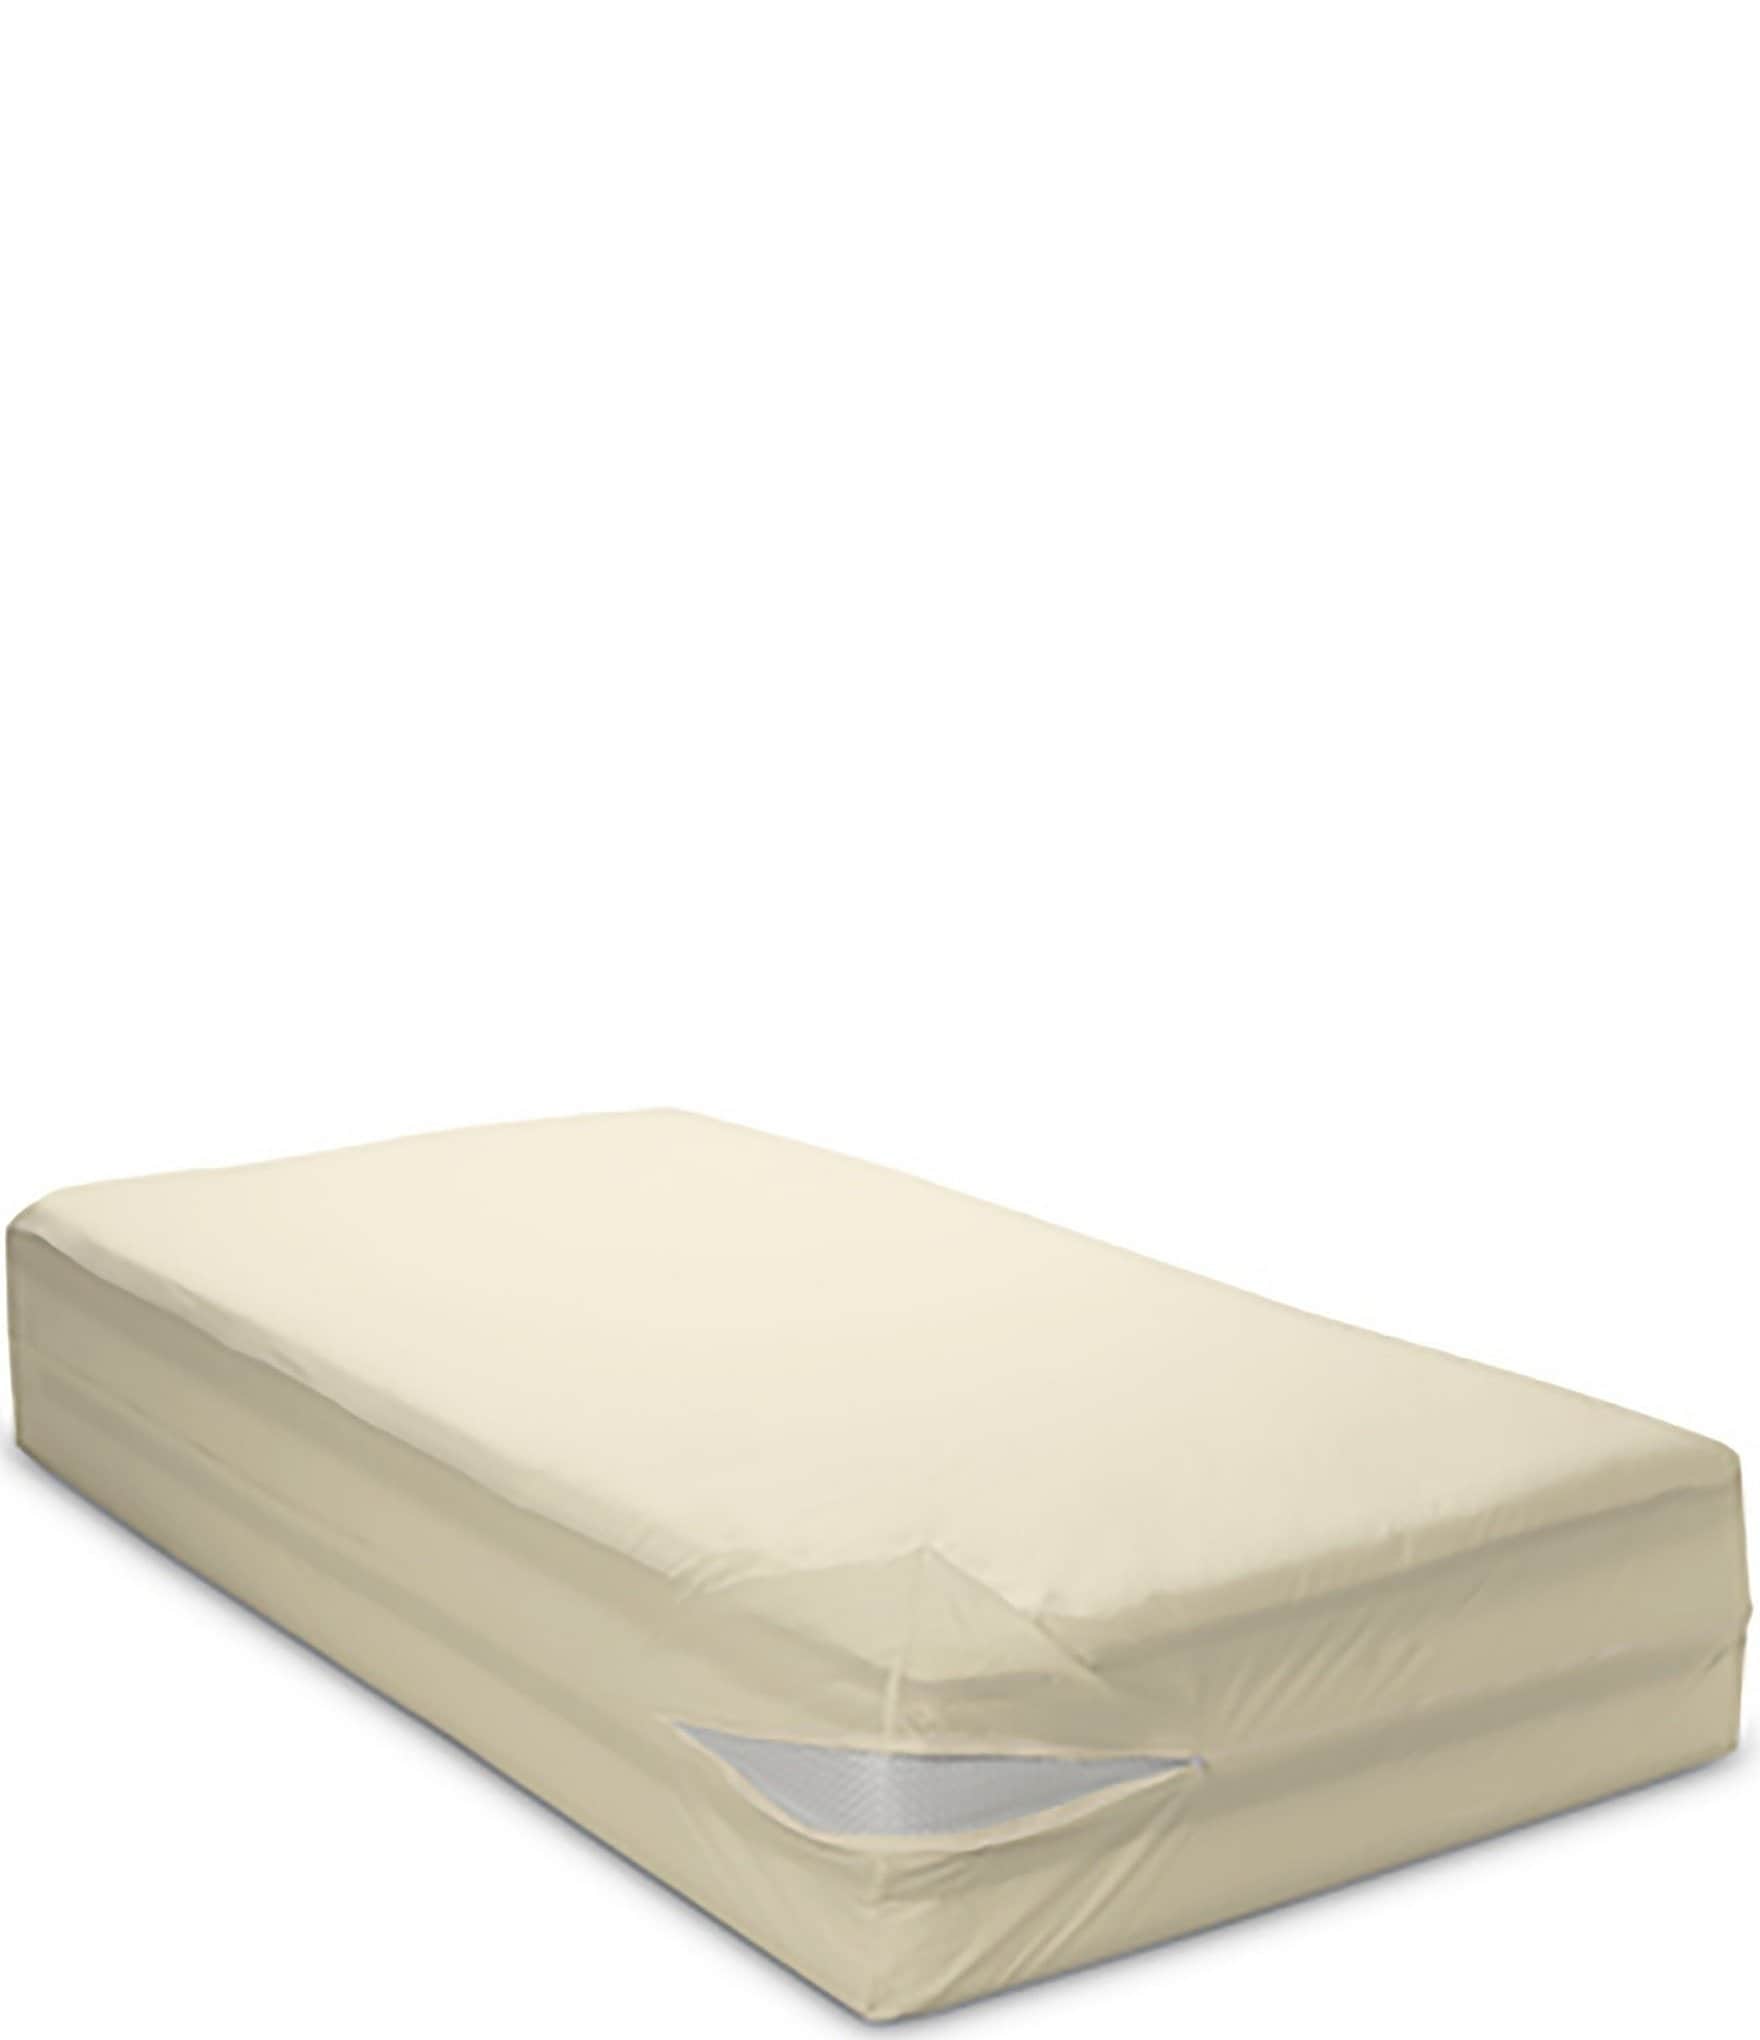 https://dimg.dillards.com/is/image/DillardsZoom/zoom/national-allergy-bedcare-organic-cotton-allergy-and-bed-bug-proof-12-mattress-cover/05803973_zi_natural.jpg